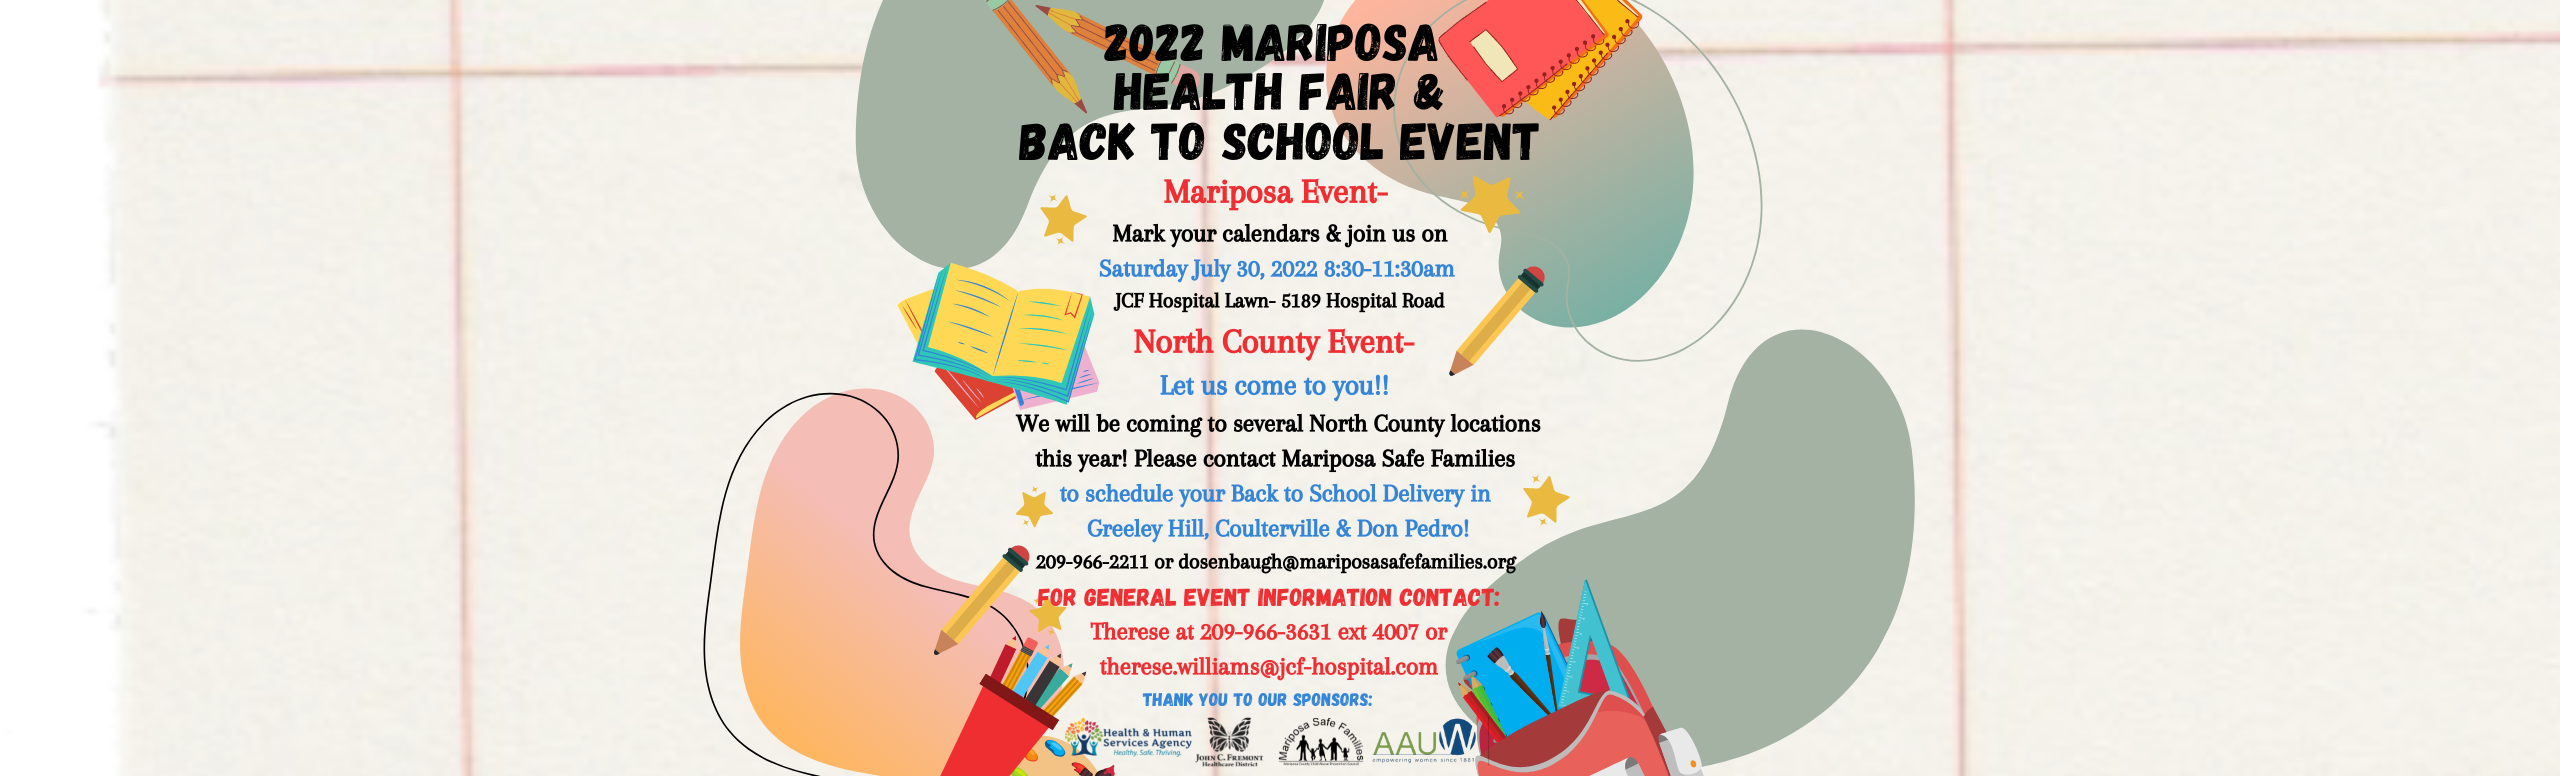 Banner graphic picture of school supplies. Banner says:

2022 MARIPOSA HEALTH FAIR & BACK TO SCHOOL EVENT

Mariposa Event-
Mark your calendars & join us on 
Saturday July 30, 2022 8:30-11:30am
JCF Hospital Lawn- 5189 Hospital Road
North County Event-
Let us come to you!!!
We will be coming to several North County locations this year! Please contact Mariposa Safe Families 
to schedule your Back to School Delivery in
Greeley Hill, Coulterville & Don Pedro!
209-966-2211 or dosenbaugh@mariposasafefamilies.org
FOR GENERAL EVENT INFORMATION CONTACT:
Therese at 209-966-3631 ext 4007 or Therese.williams@jcf-hospital.com
THANK YOU TO OUR SPONSORS